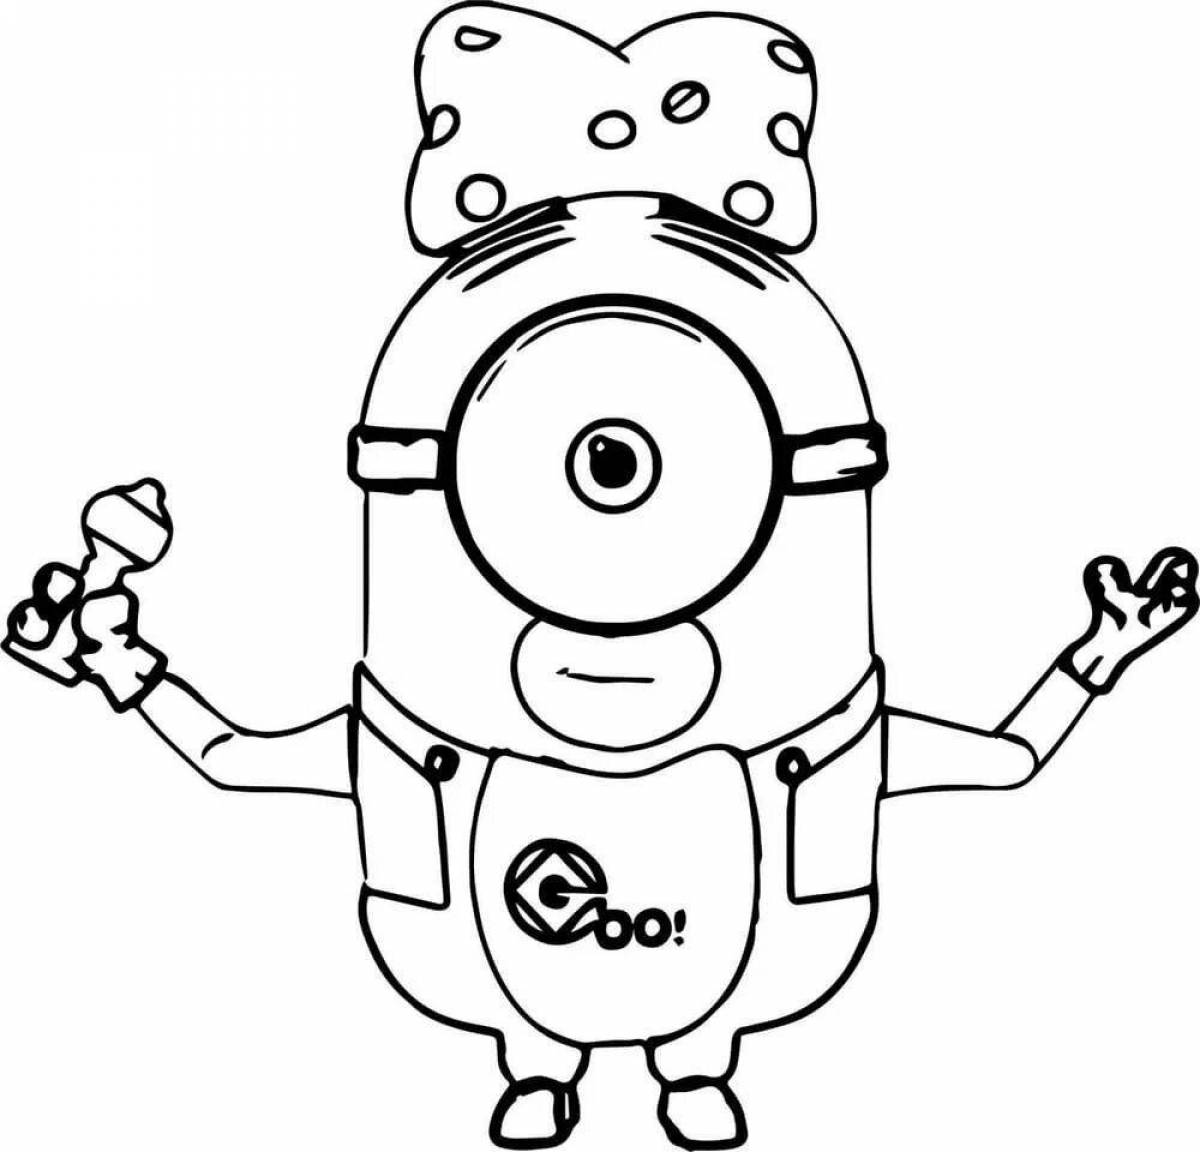 Amazing minion coloring pages